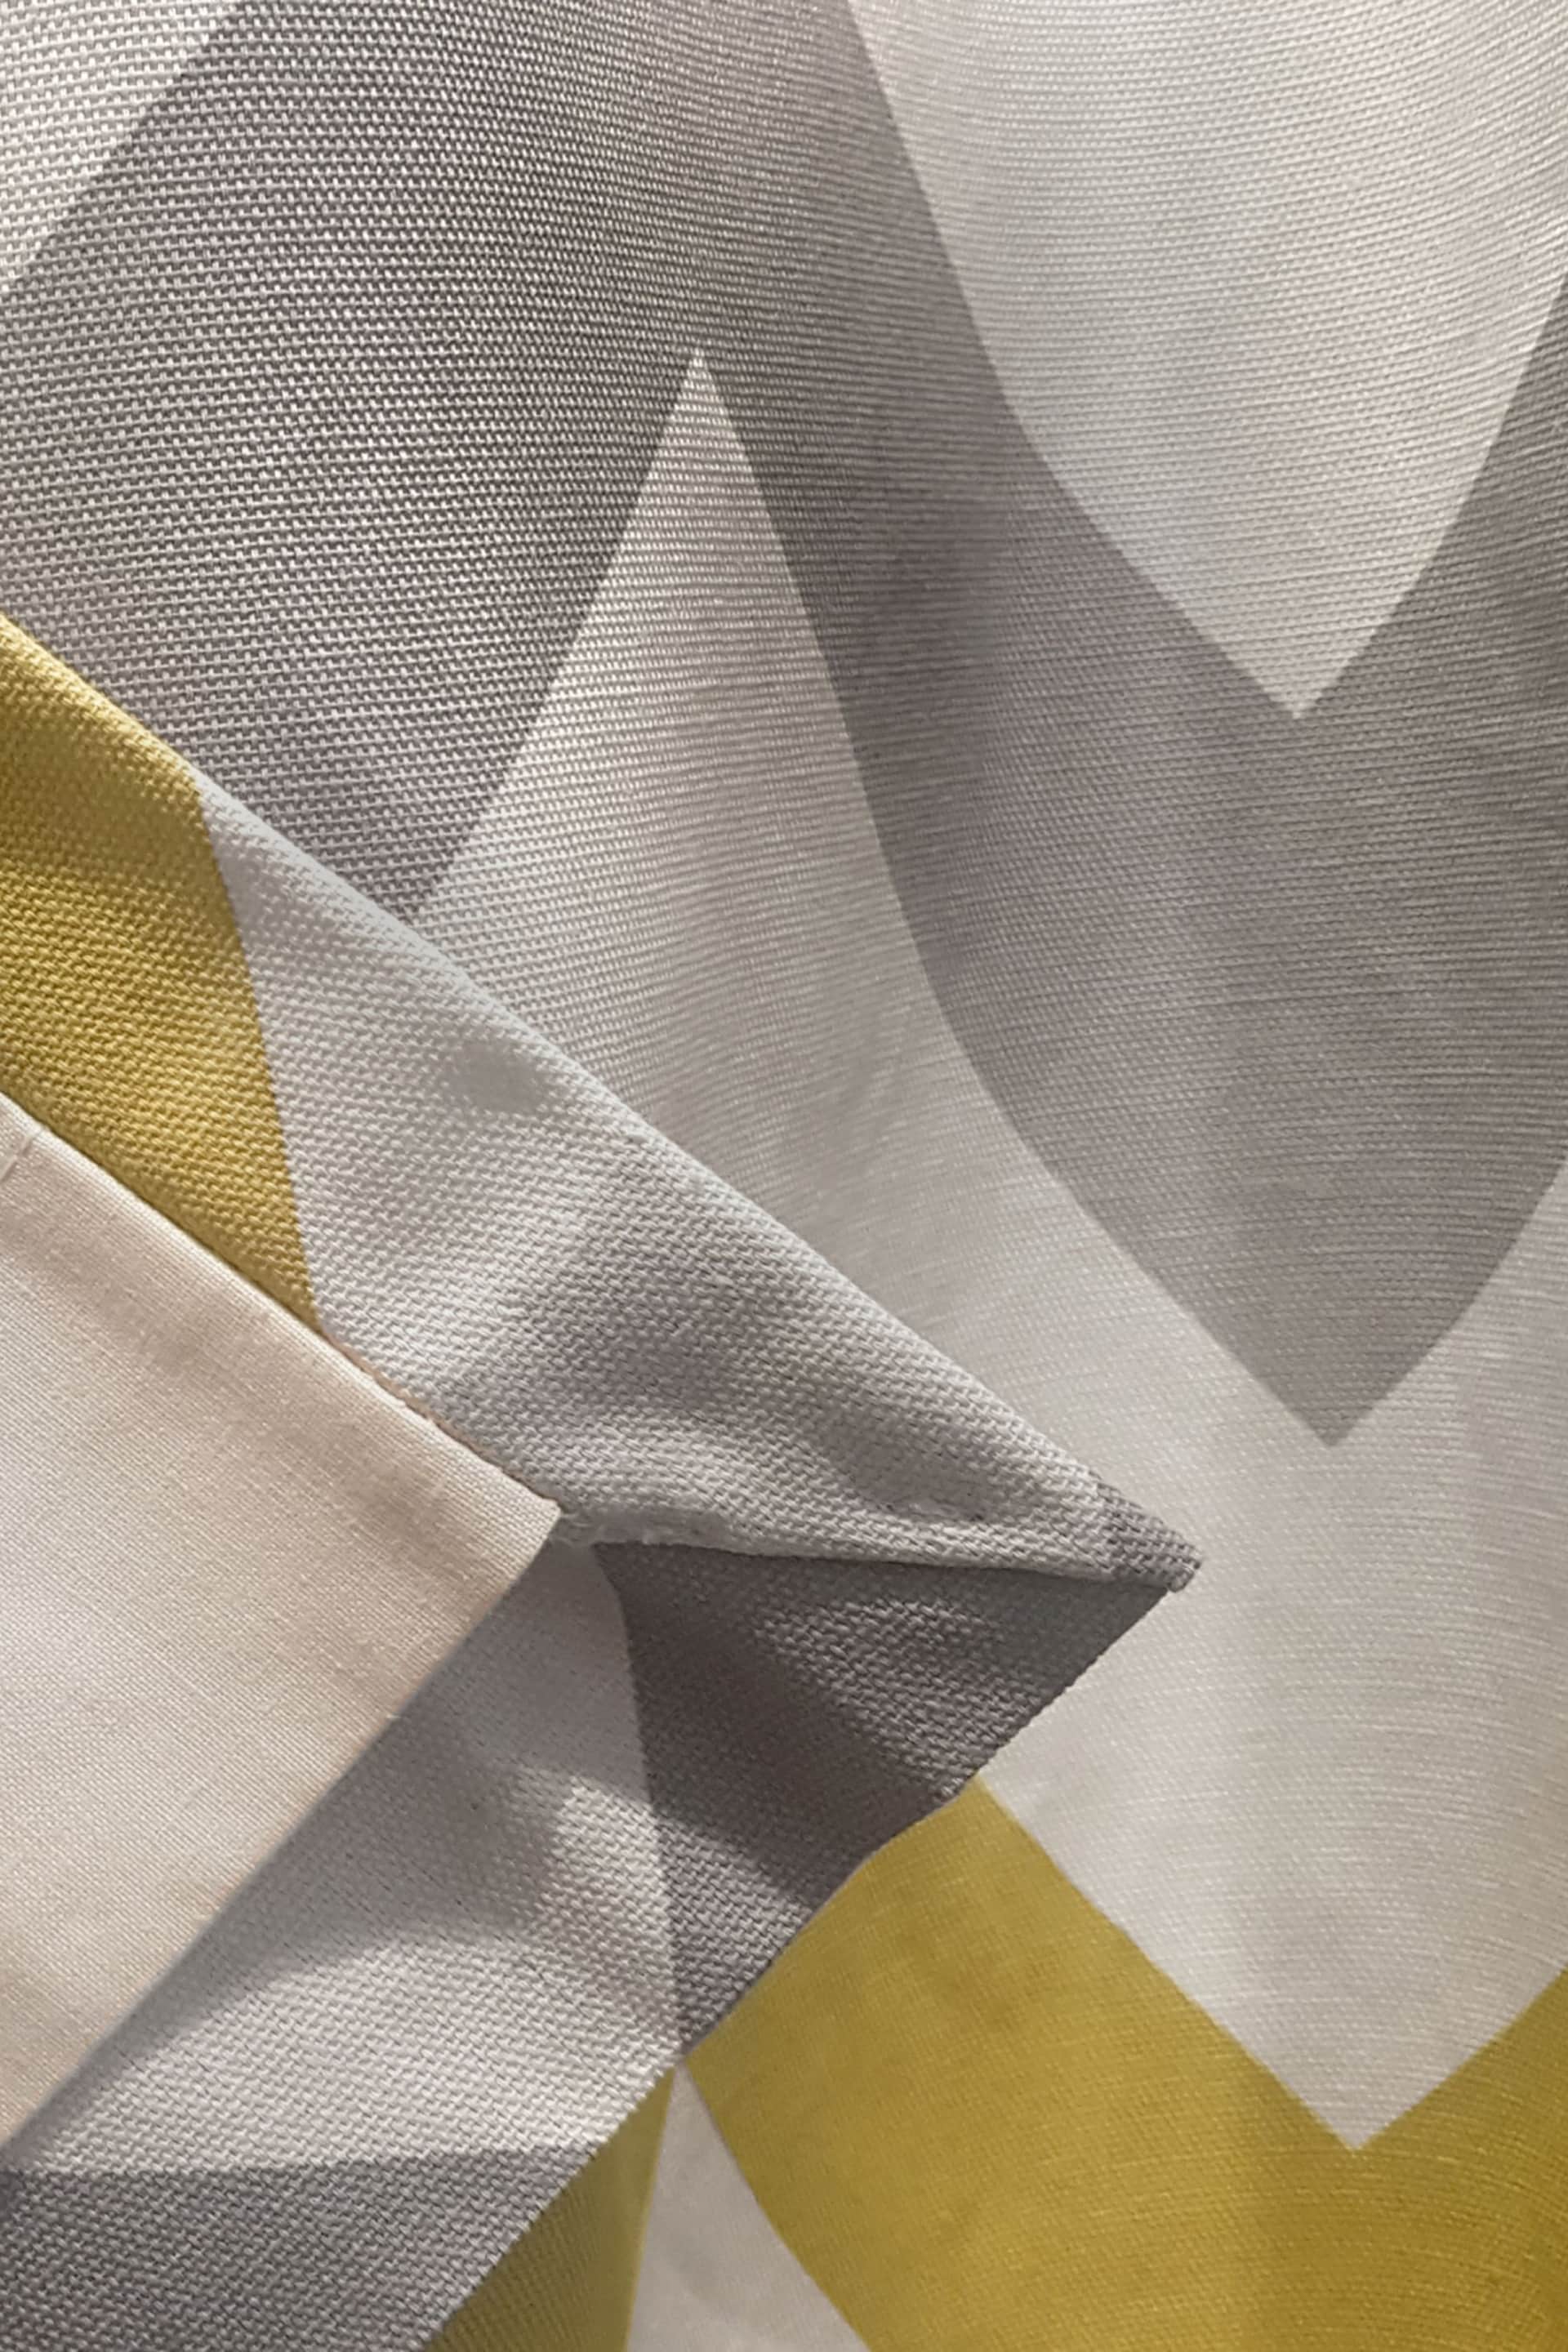 Fusion Ochre Yellow Chevron Geo Lined Eyelet Curtains - Image 3 of 3